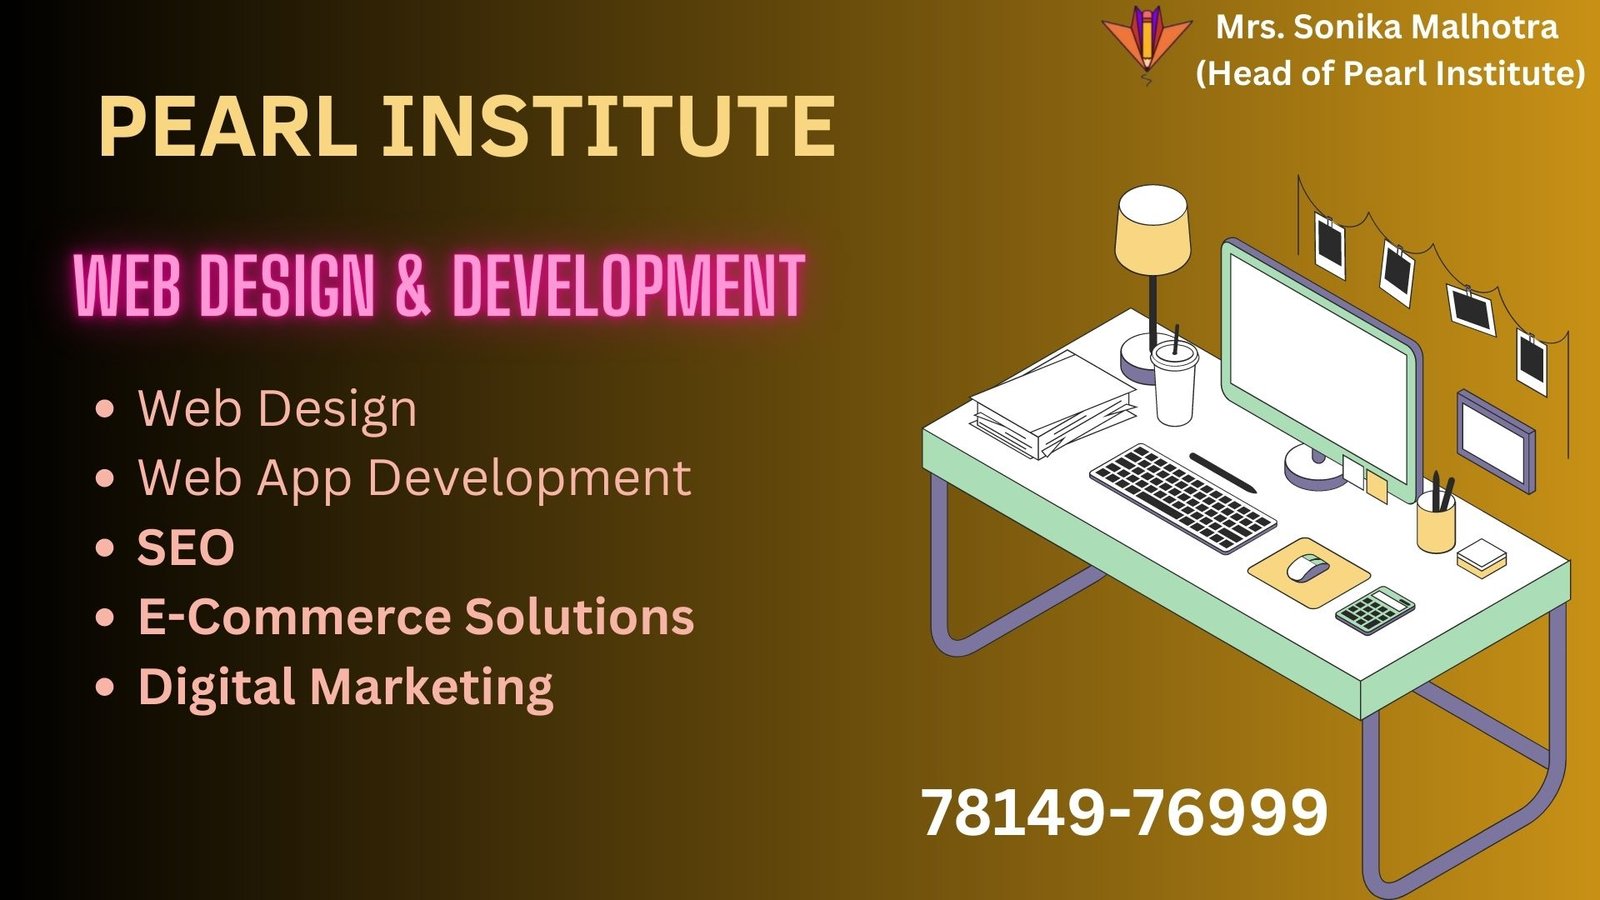 Web Designing and Development Services